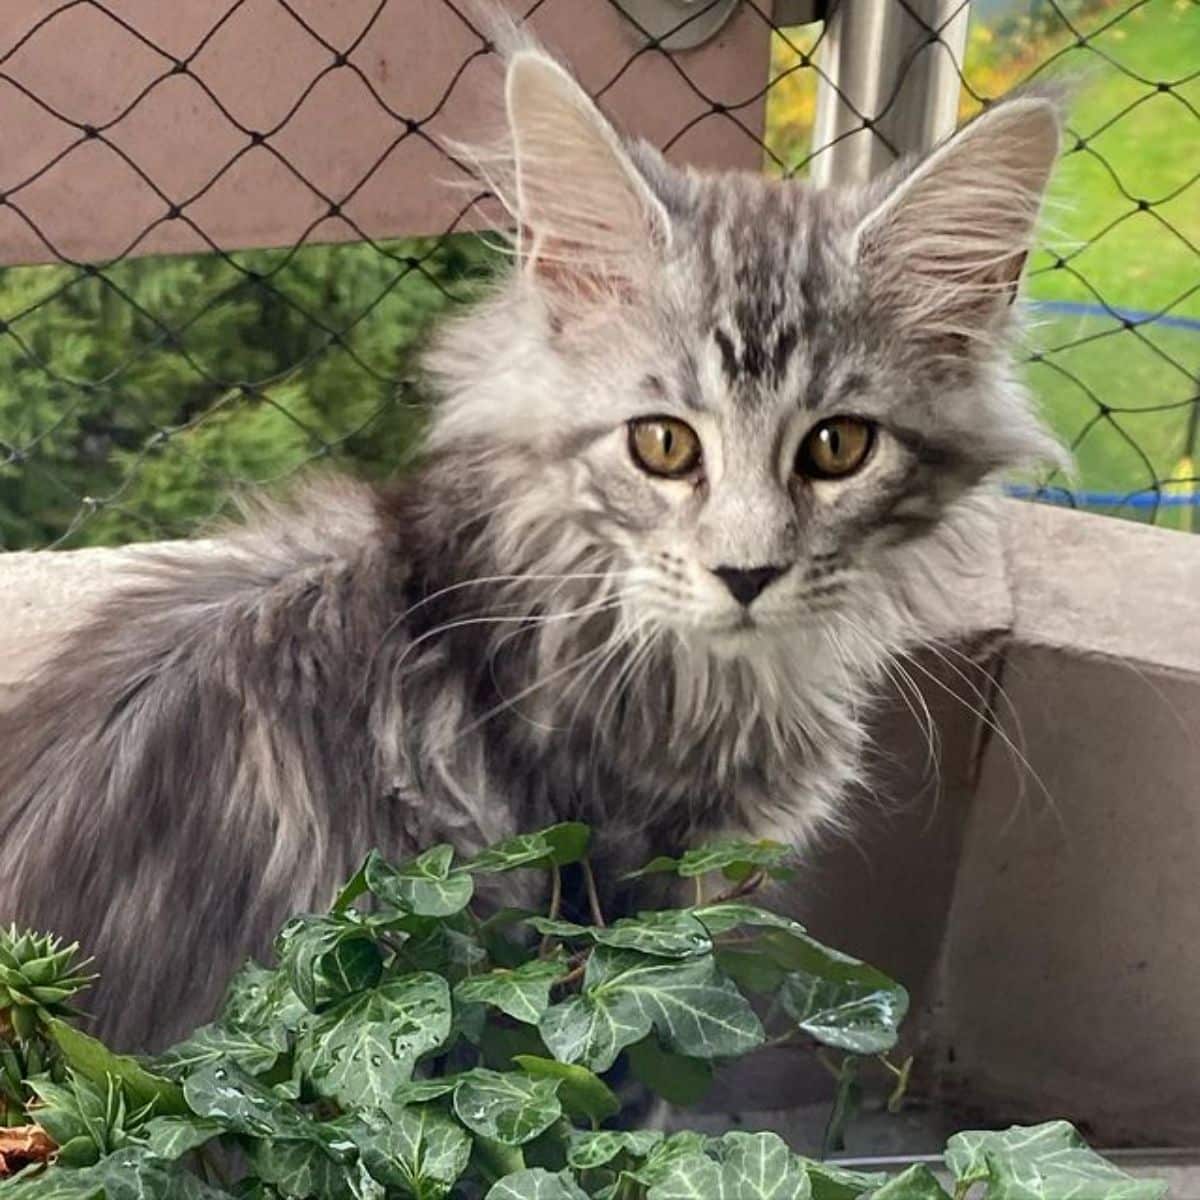 A fluffy gray maine coon kitten sitting near a plant and curbs.